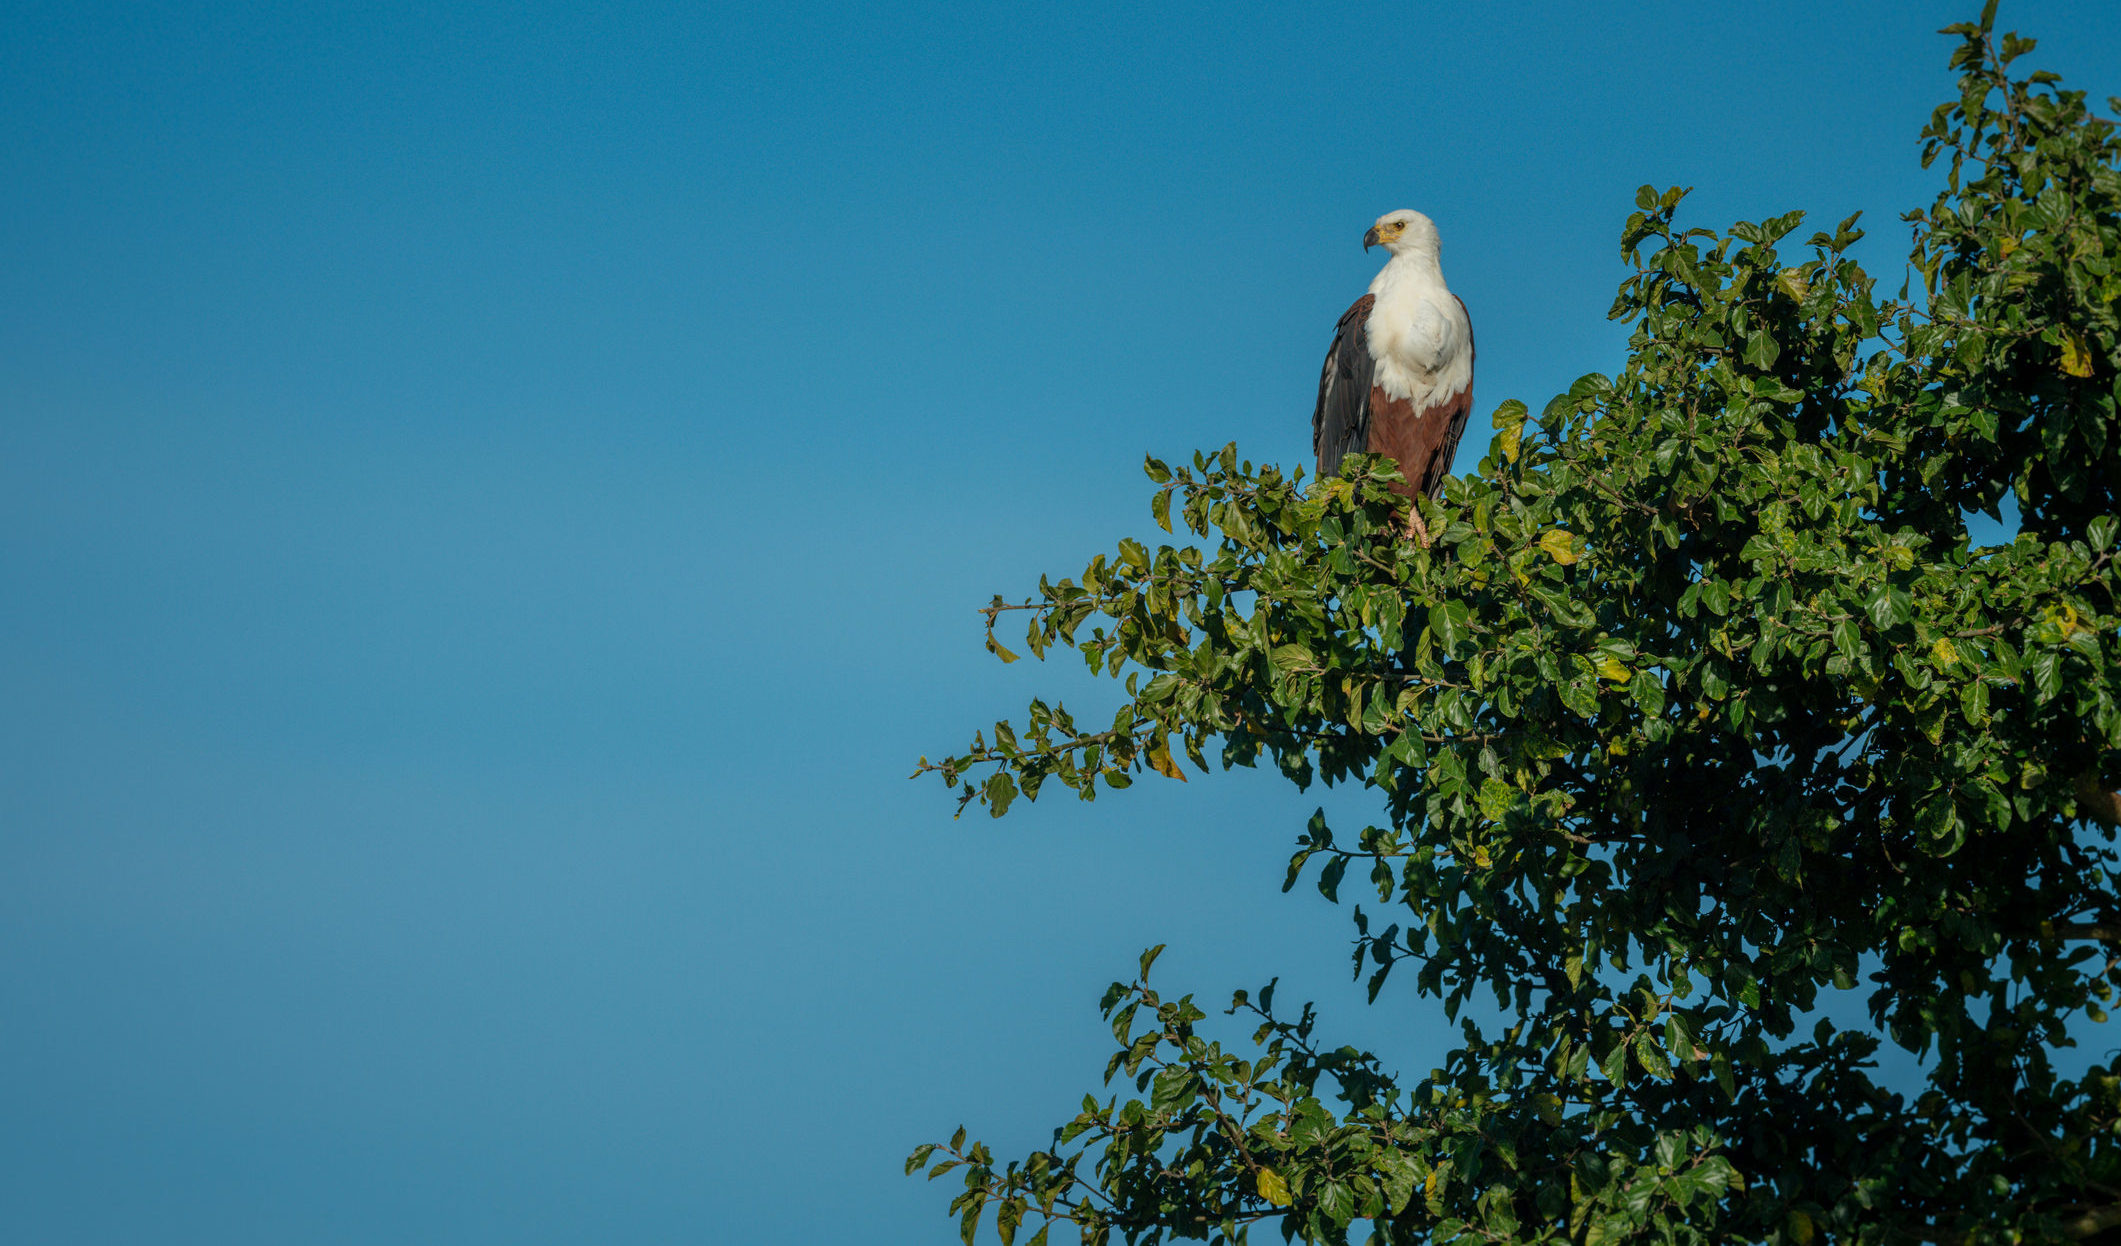 Witness extraordinary wildlife like this African fish eagle when you take a tailor-made holiday with Alfred&.